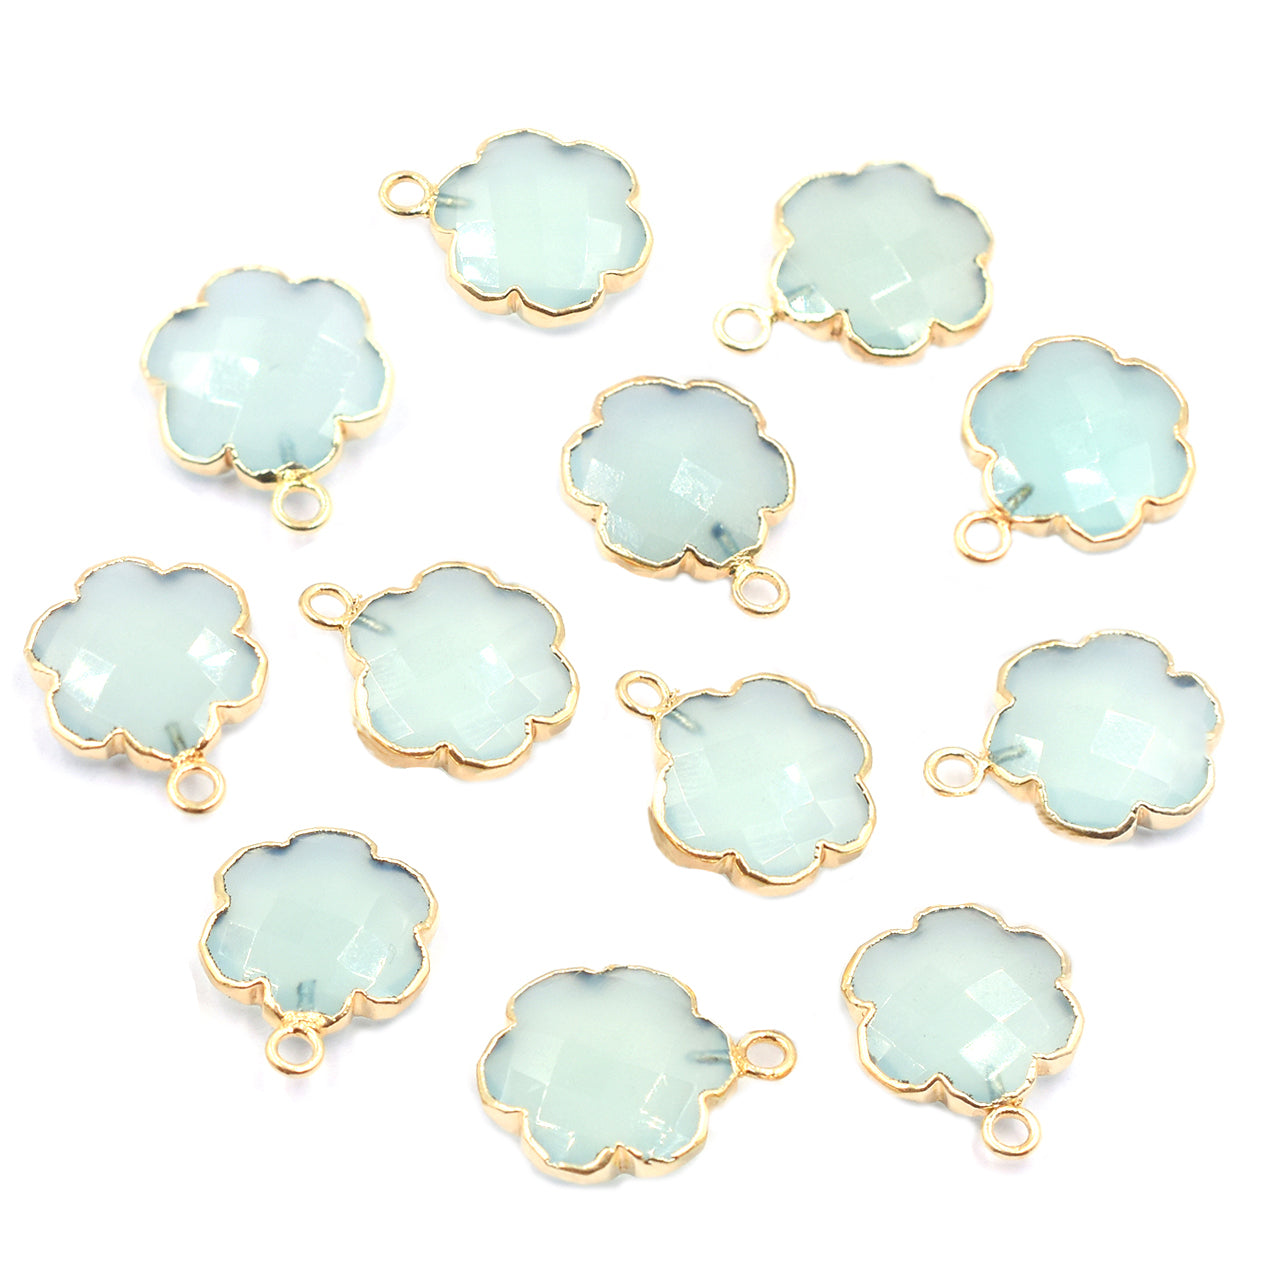 Aqua Chalcedony 13 To 15 MM Clover Leaf Shape Gold Electroplated Pendant